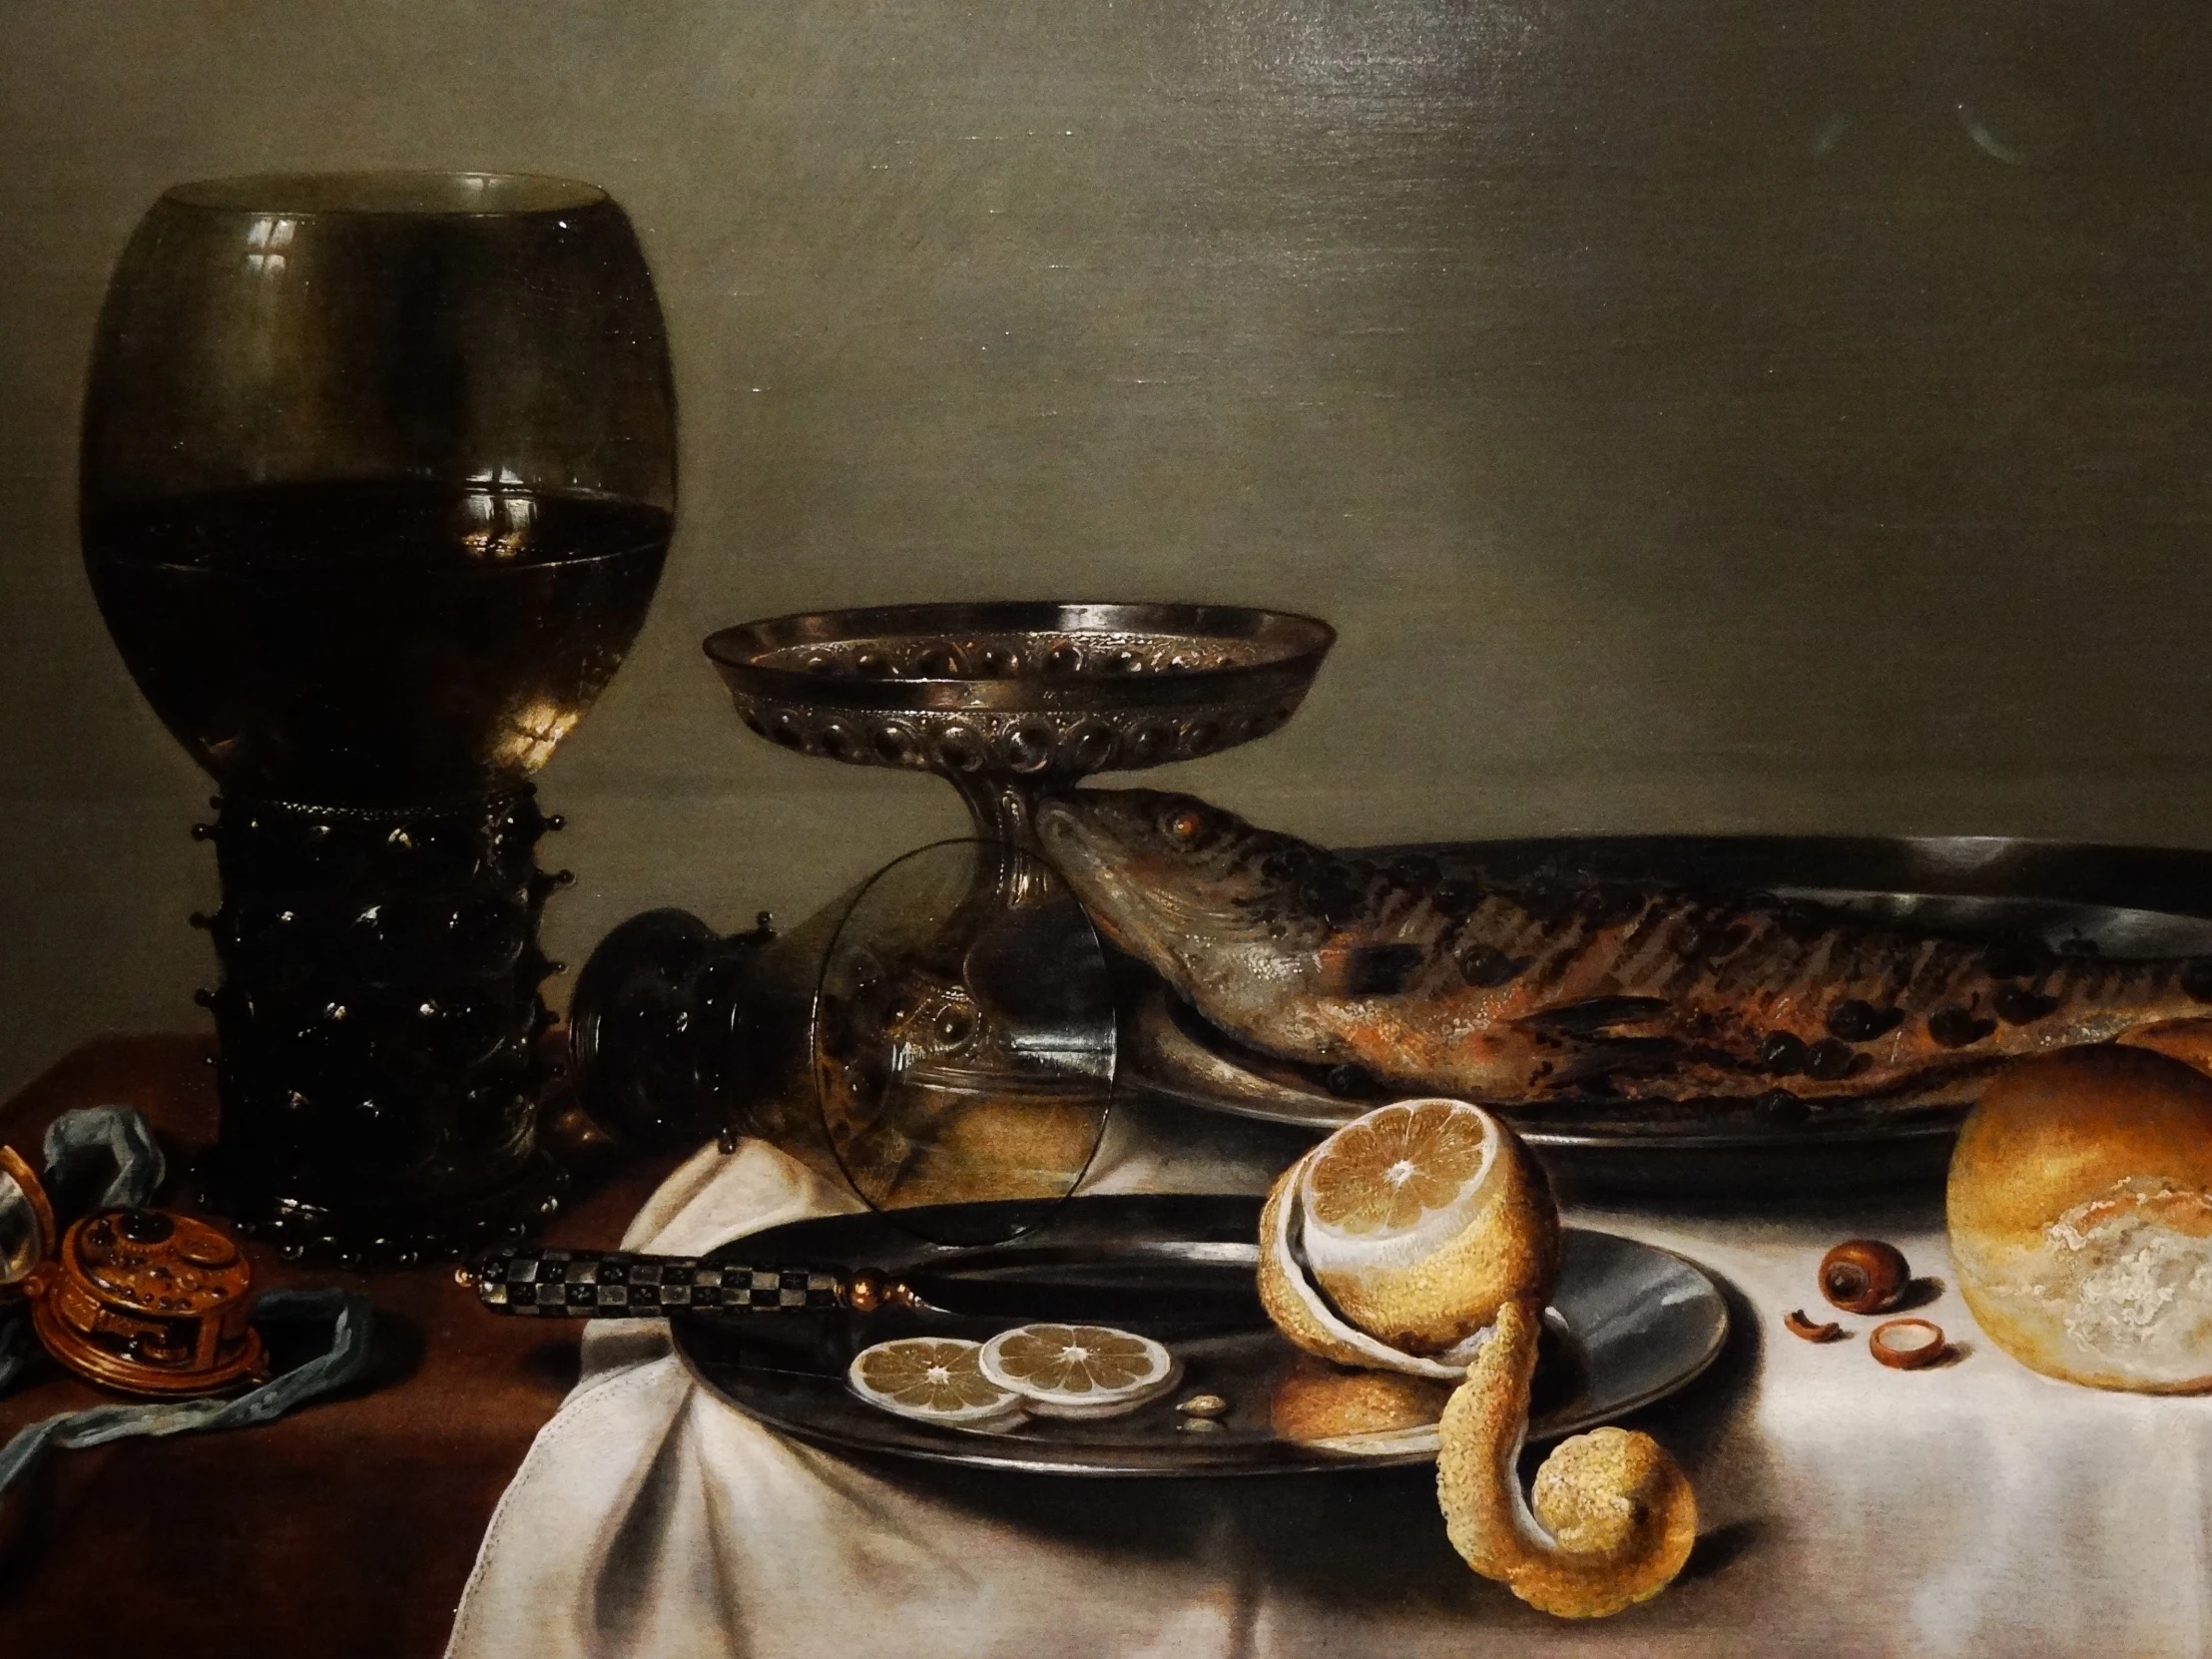 this is a painting showing bread, jams and wine